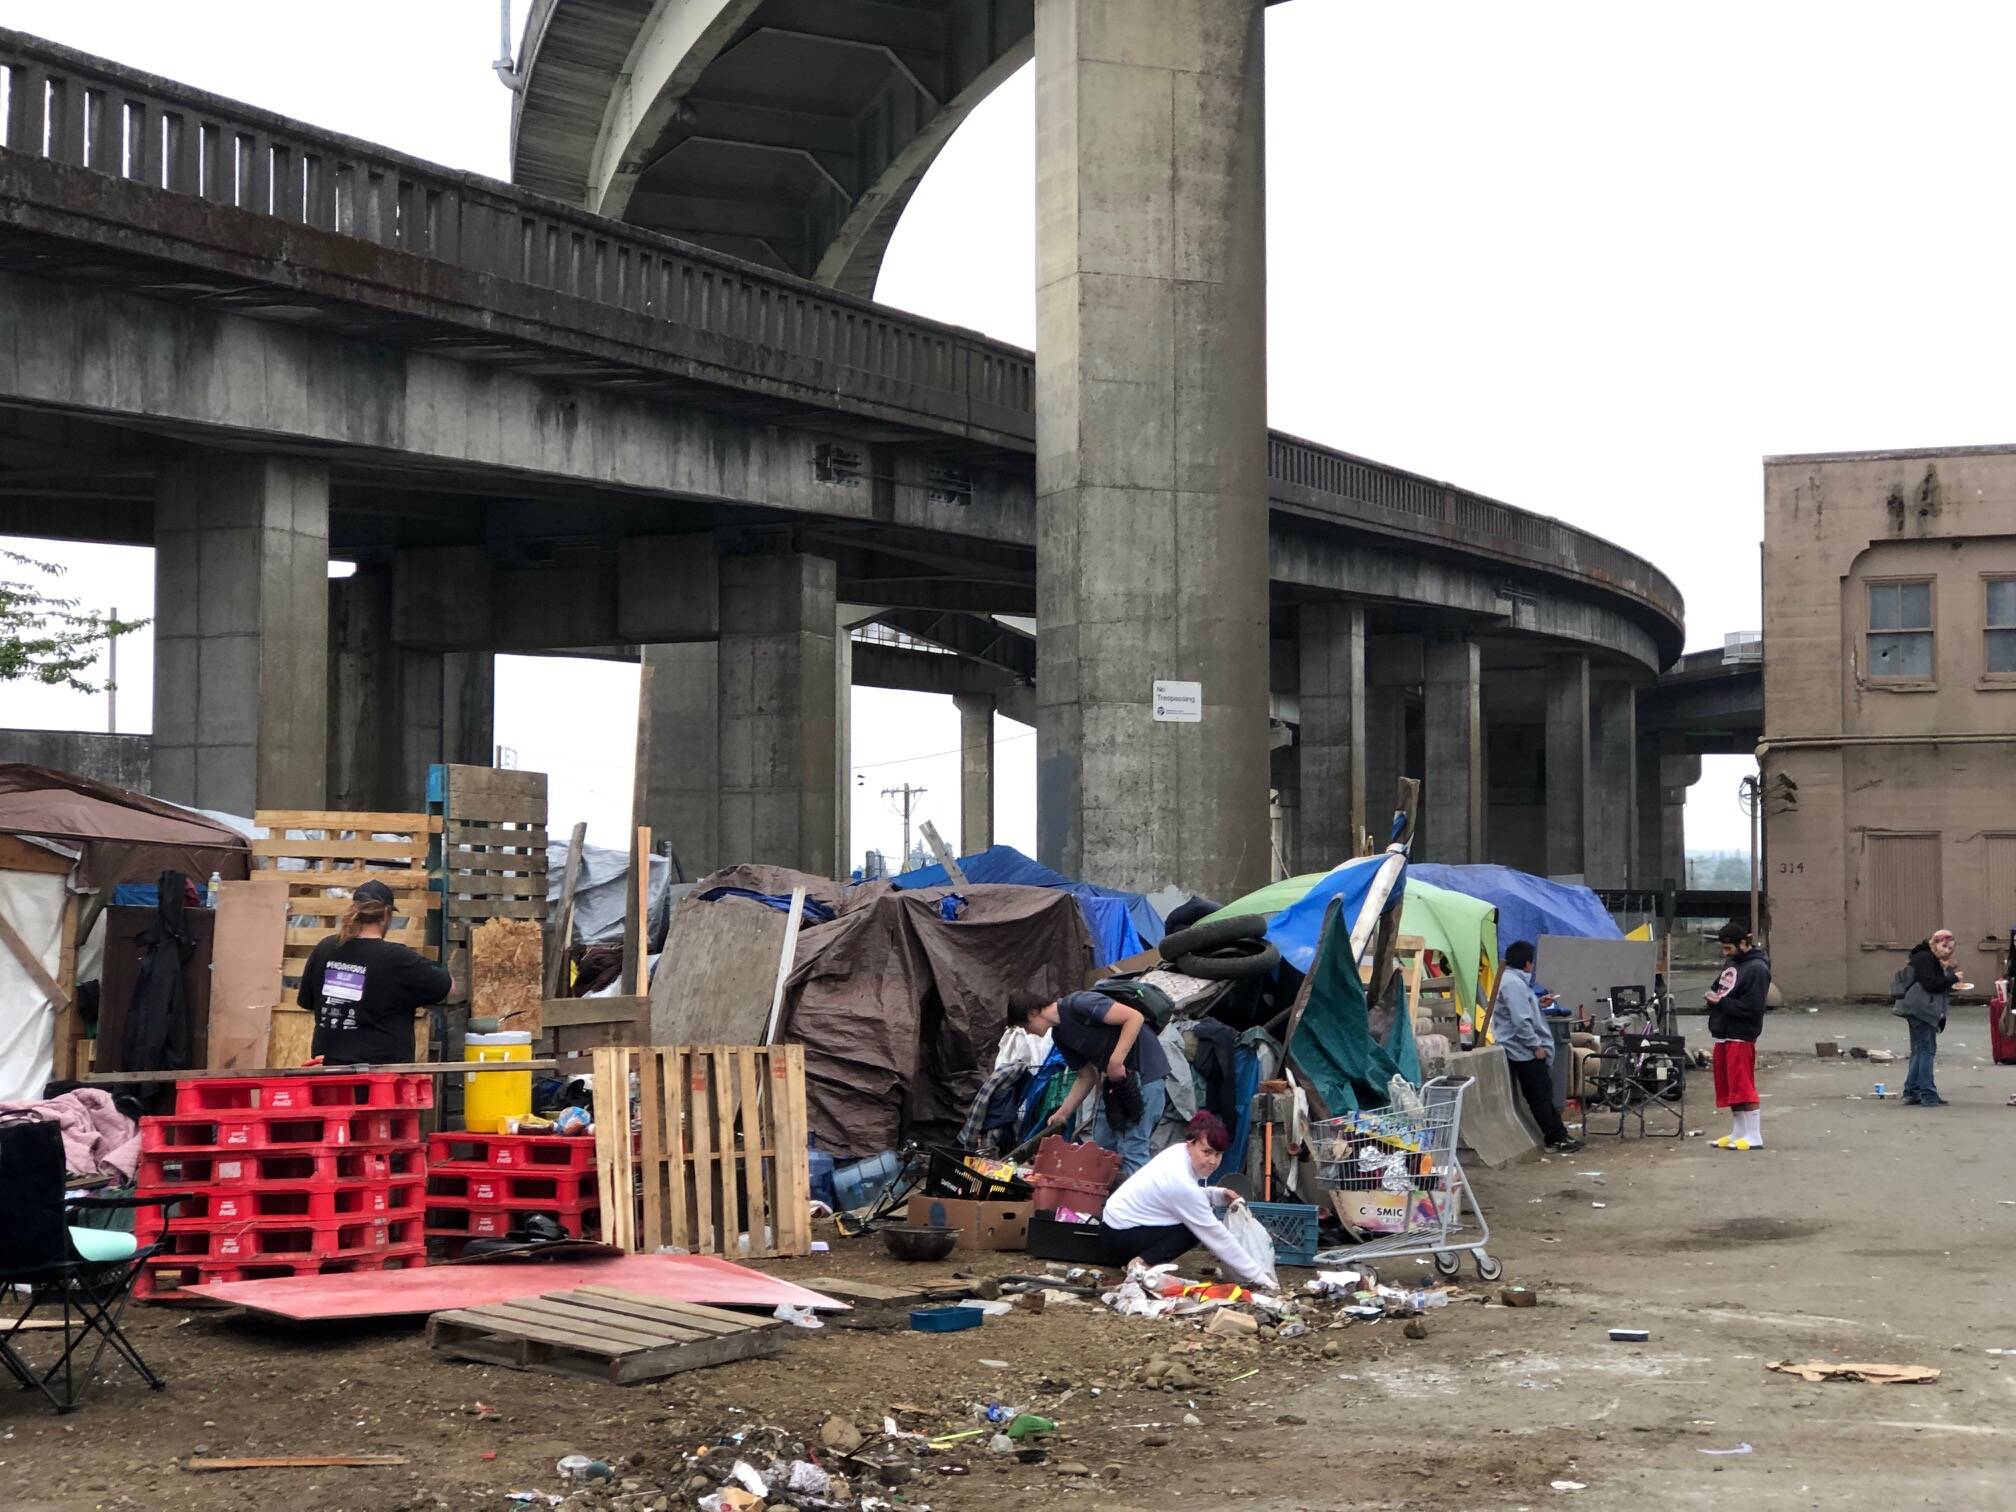 Michael Wagar | The Daily World
A homeless camp at the base of the Chehalis River Bridge reeked with the smell of urine downwind of the shelters on Monday afternoon.